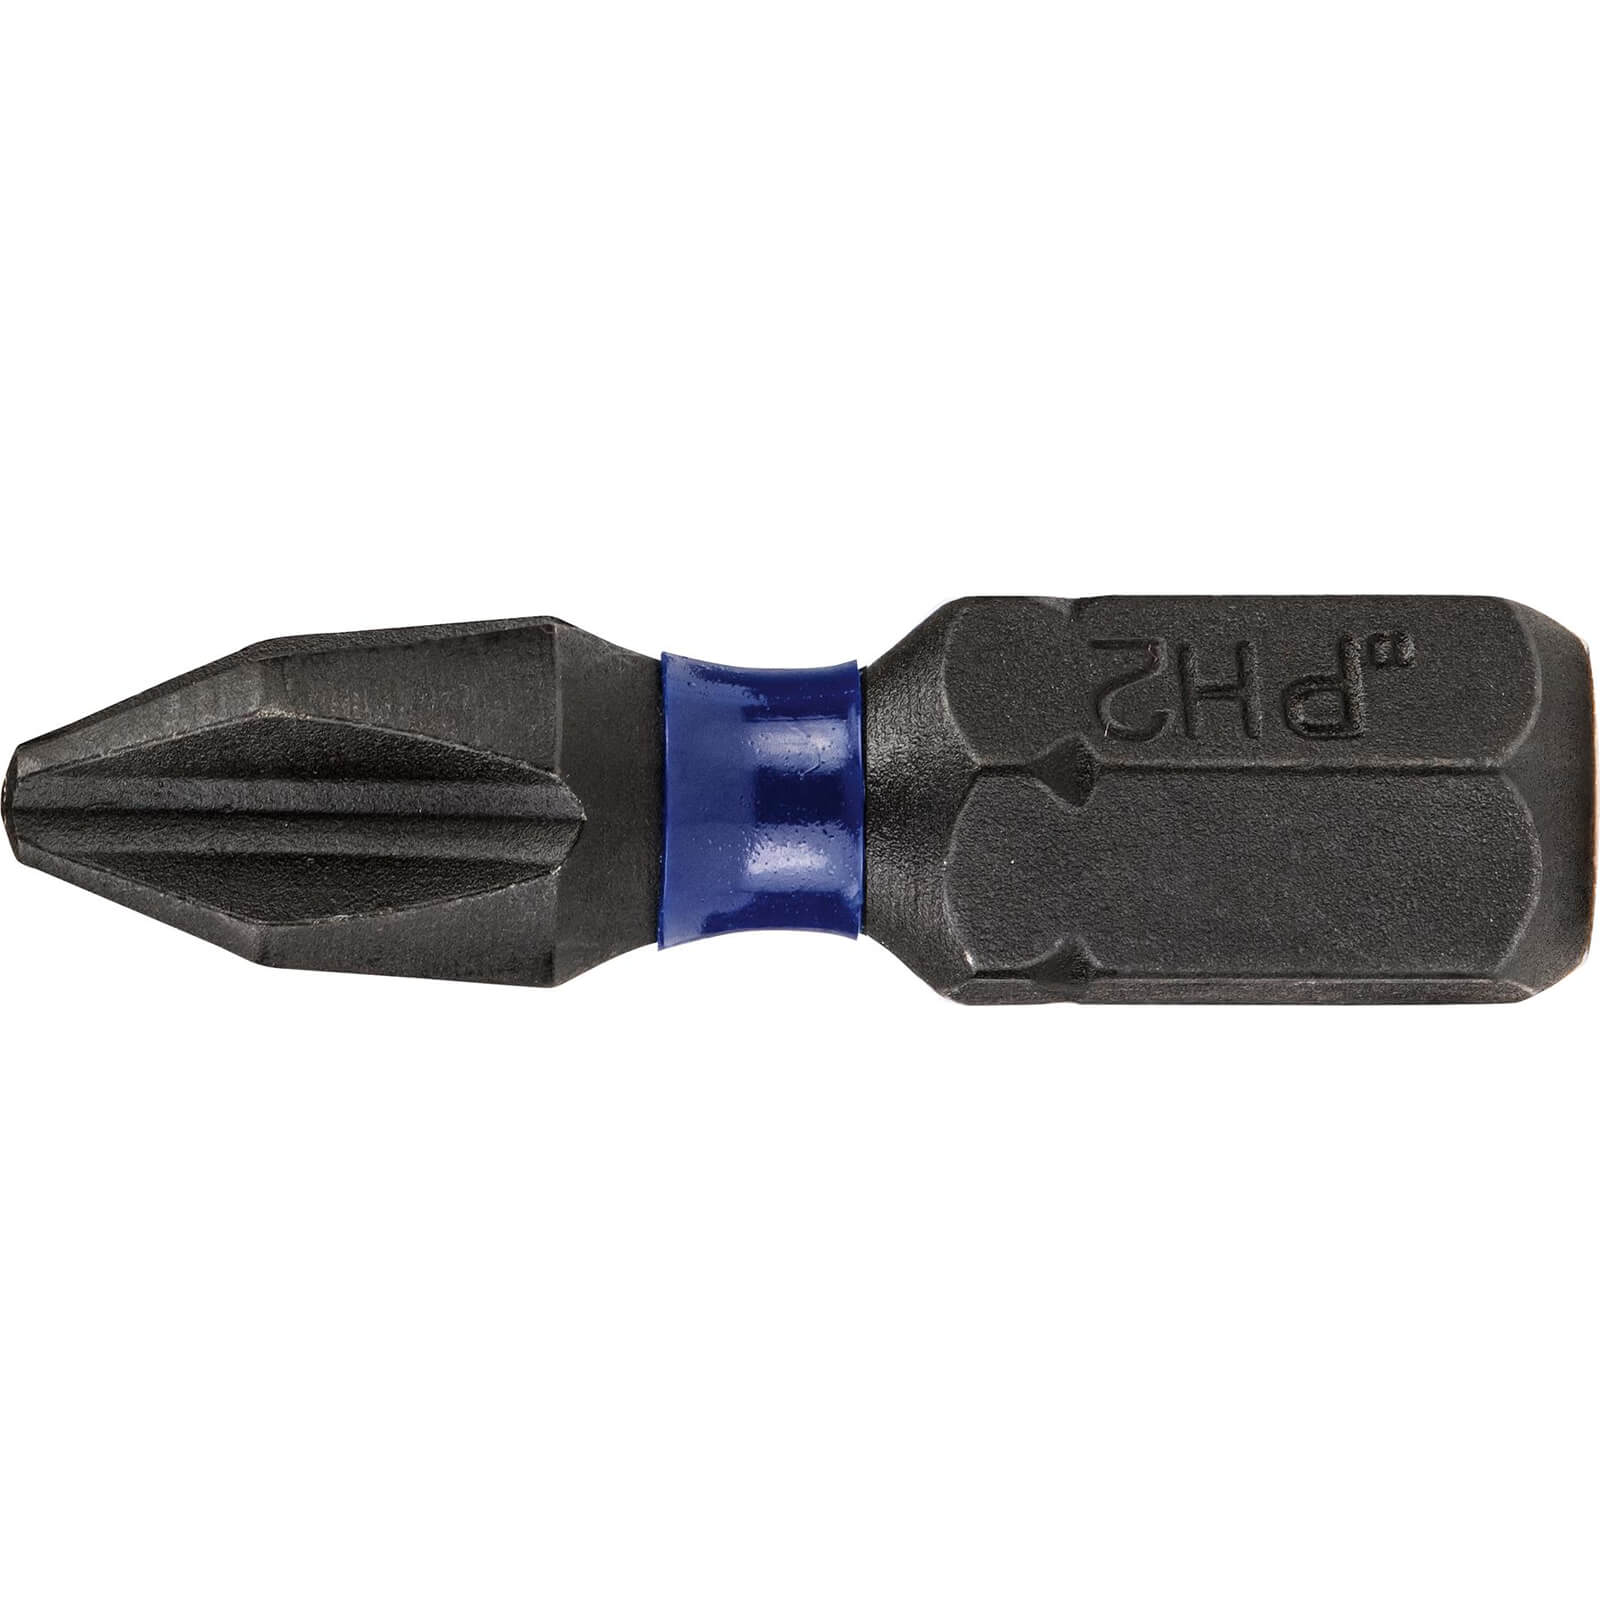 Image of Irwin Impact Pro Performance Phillips Screwdriver Bits PH2 25mm Pack of 10